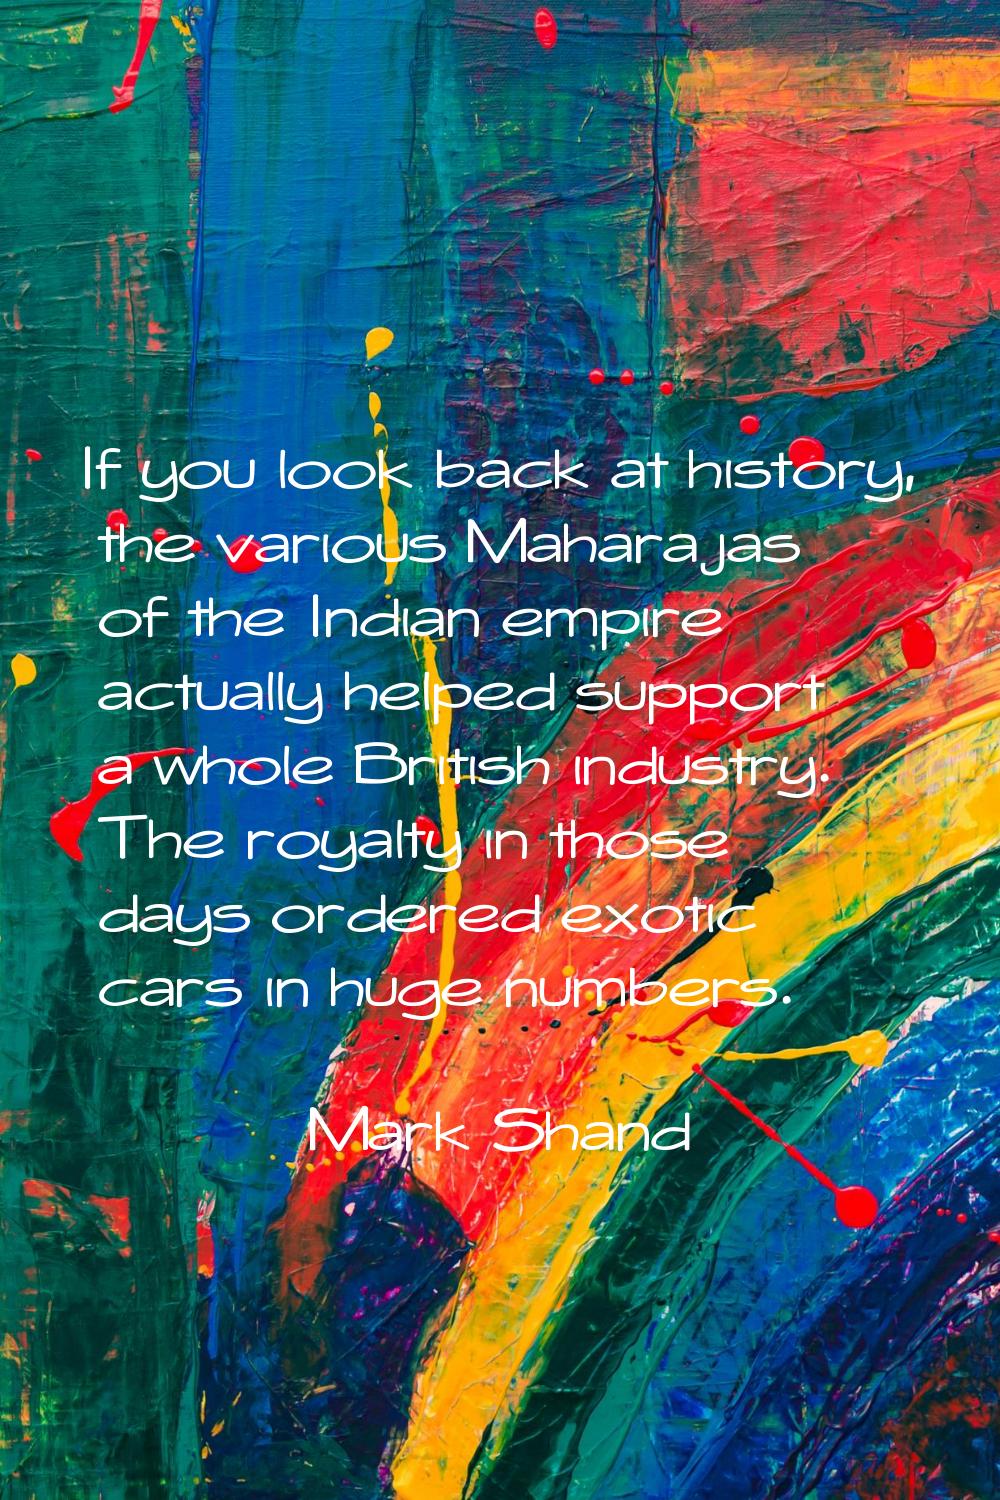 If you look back at history, the various Maharajas of the Indian empire actually helped support a w